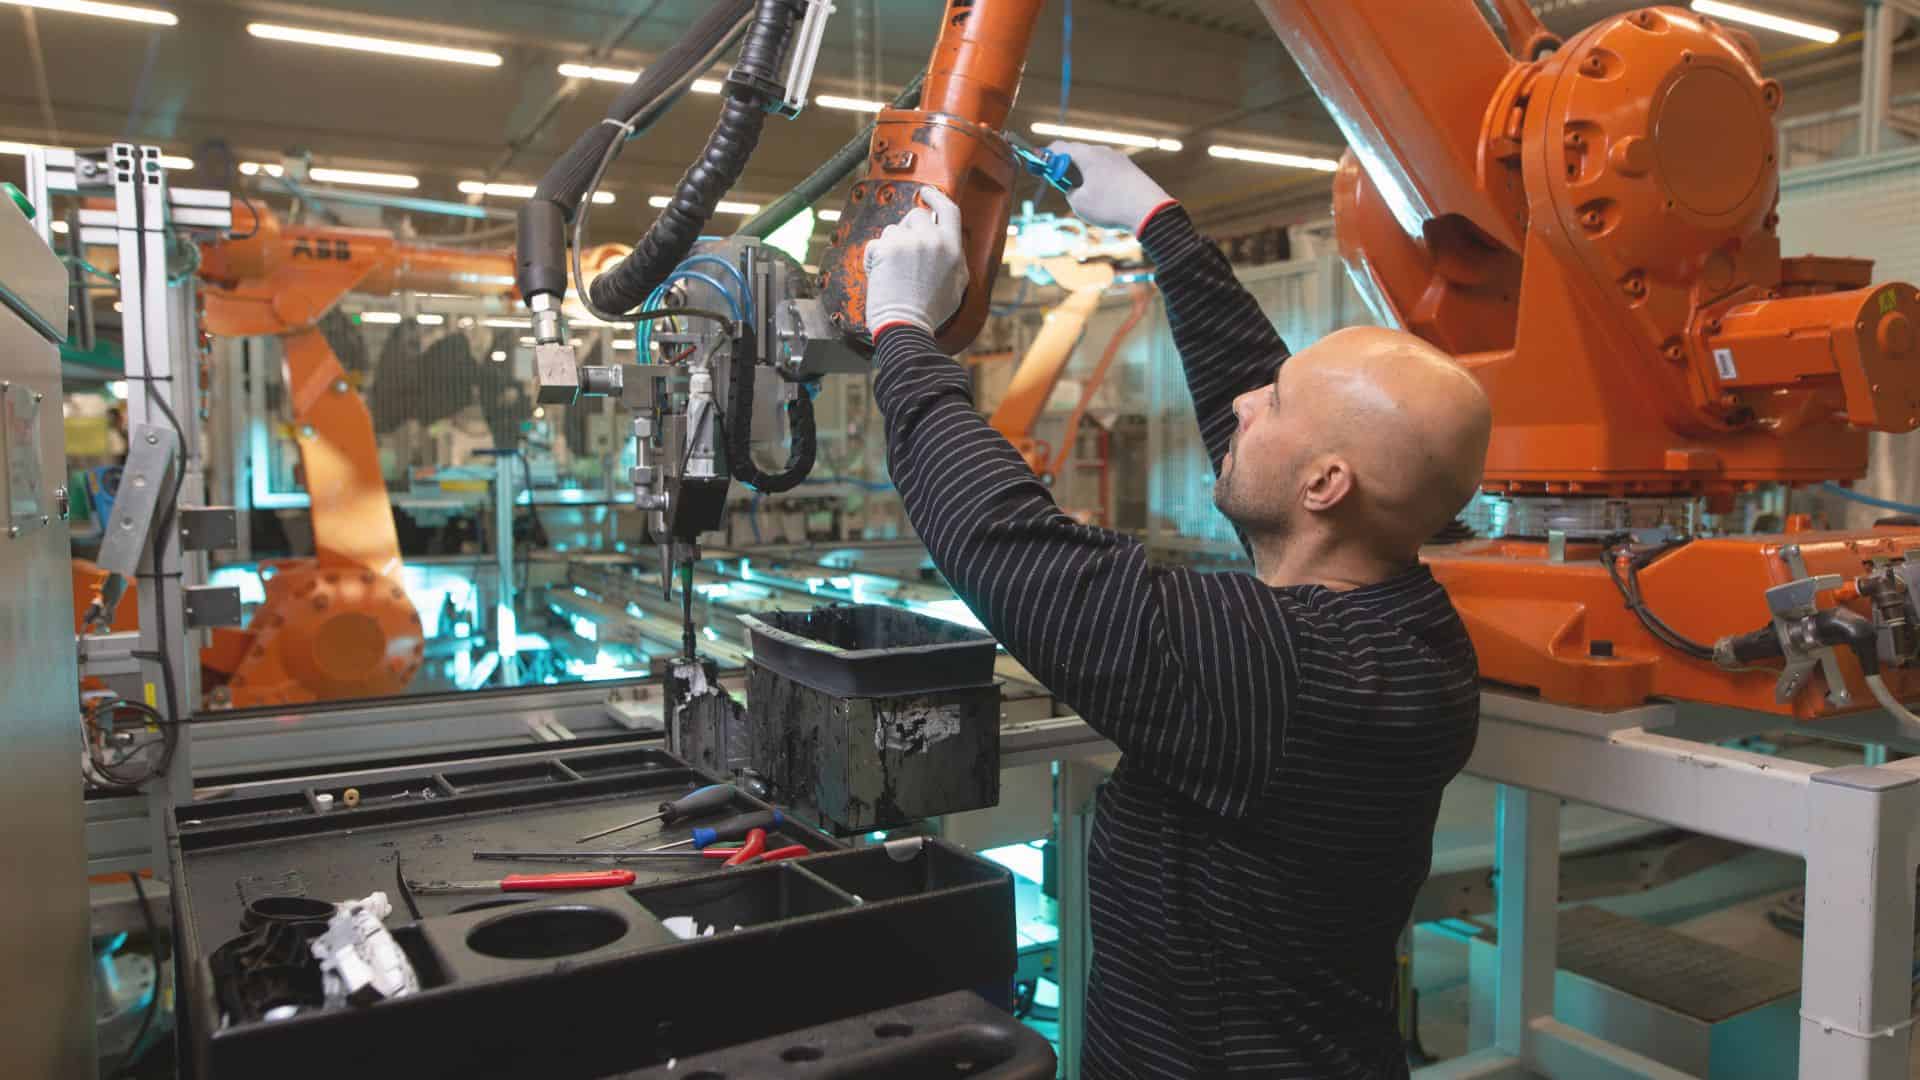 An expert technician in the field of automotive digital quality, wearing protective gear, is engaged in the precise task of fixing a cobalt component within an Industry 4.0 automotive manufacturing environment. The scene is equipped with state-of-the-art digital tools and machinery, emphasizing the role of advanced technologies in enhancing manufacturing precision and efficiency. In the background, computer monitors display vital real-time diagnostics and data analytics, illustrating the critical integration of digital quality control measures in modern vehicle production processes